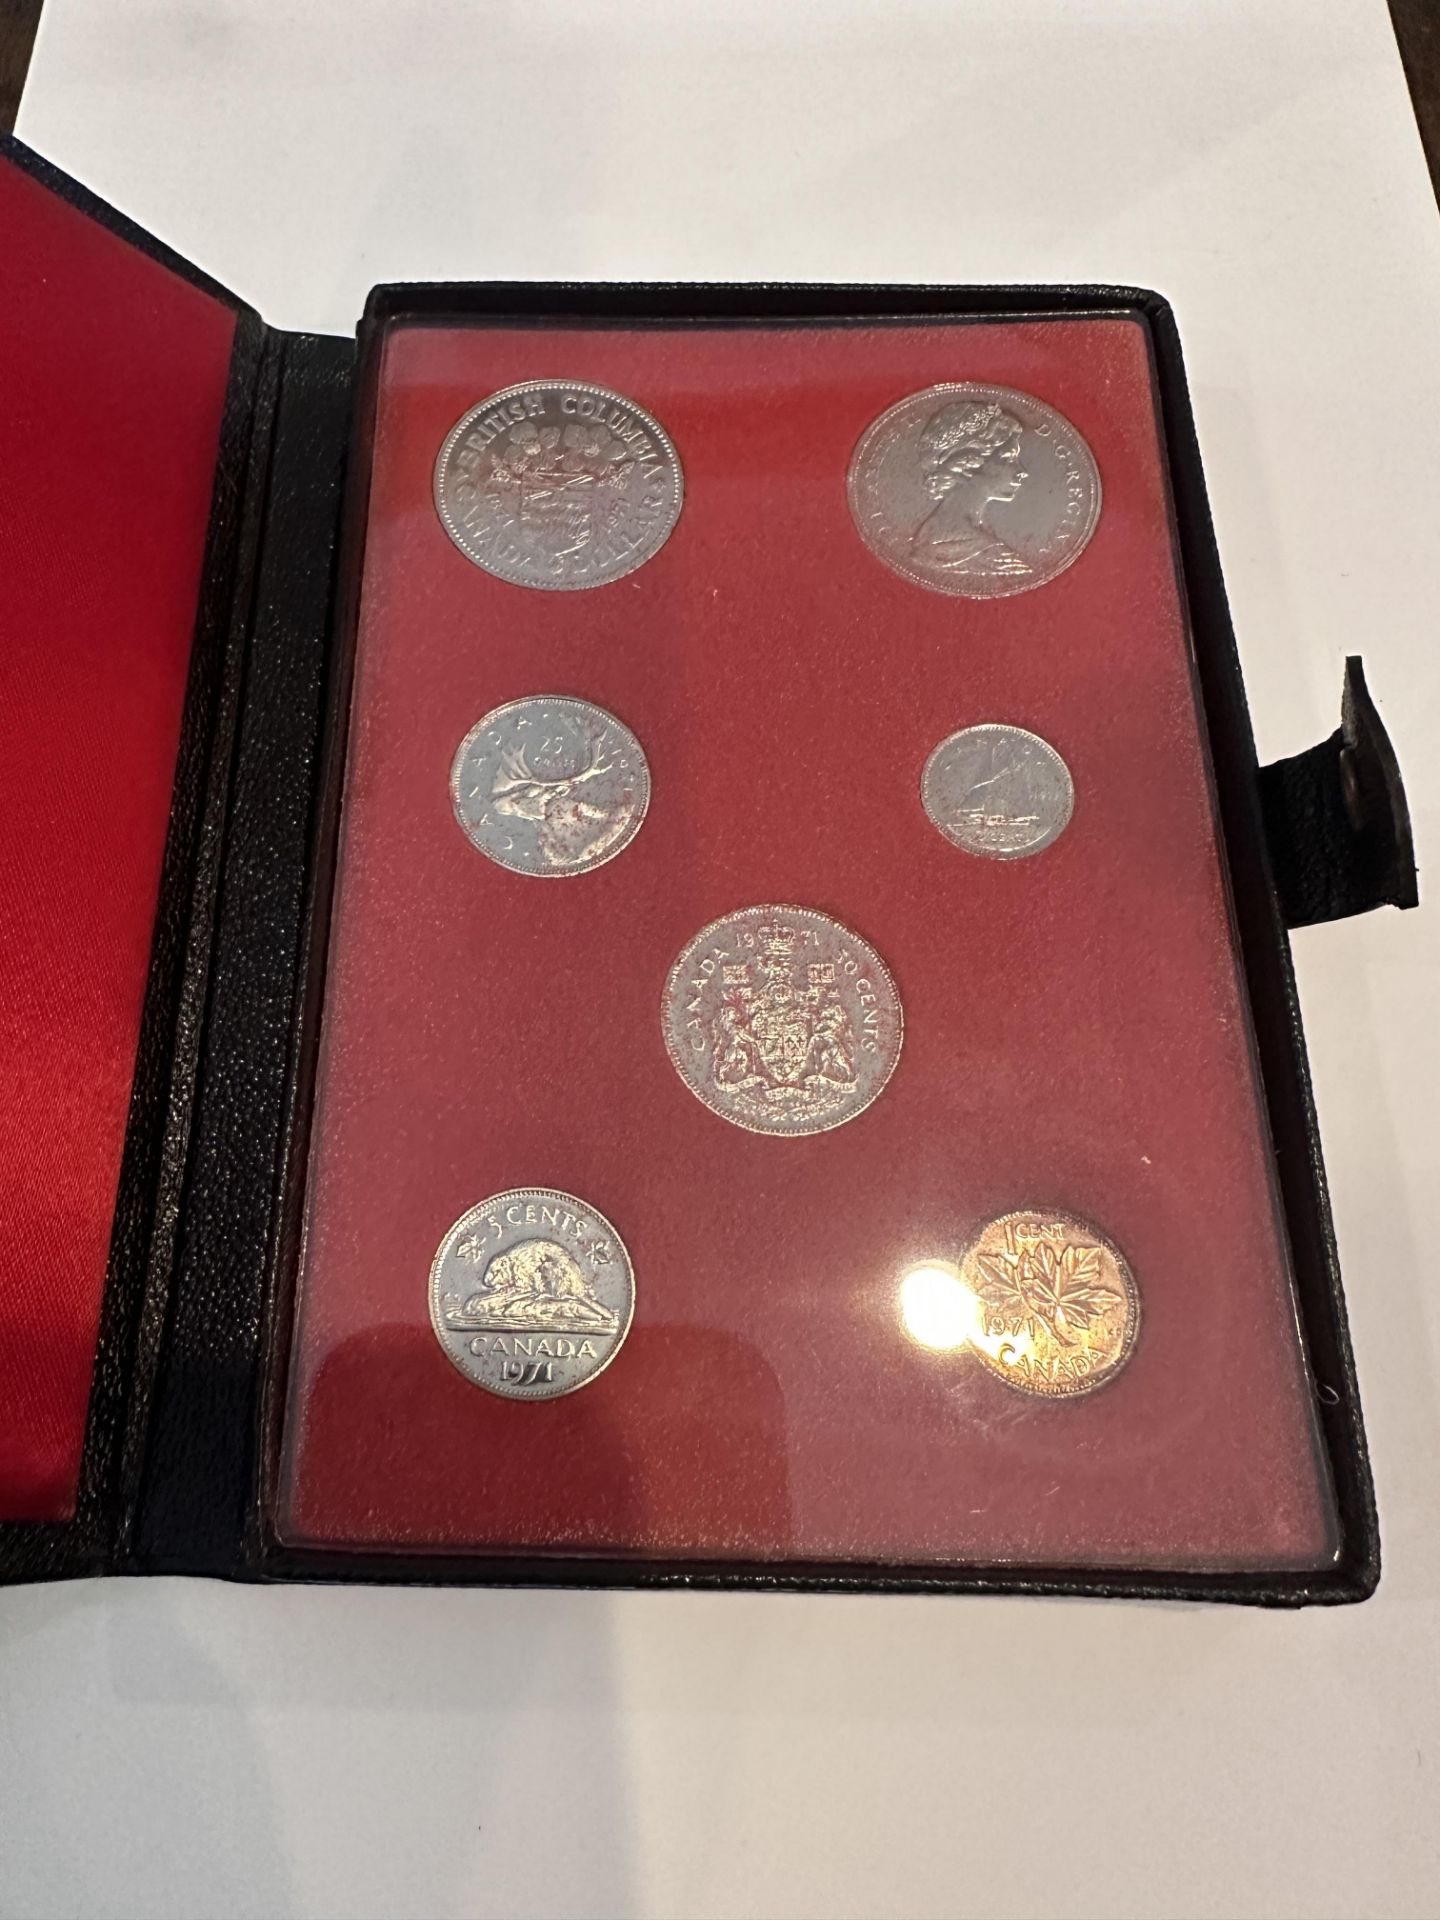 1971 ROYAL CANADIAN MINT PROOF COIN SET